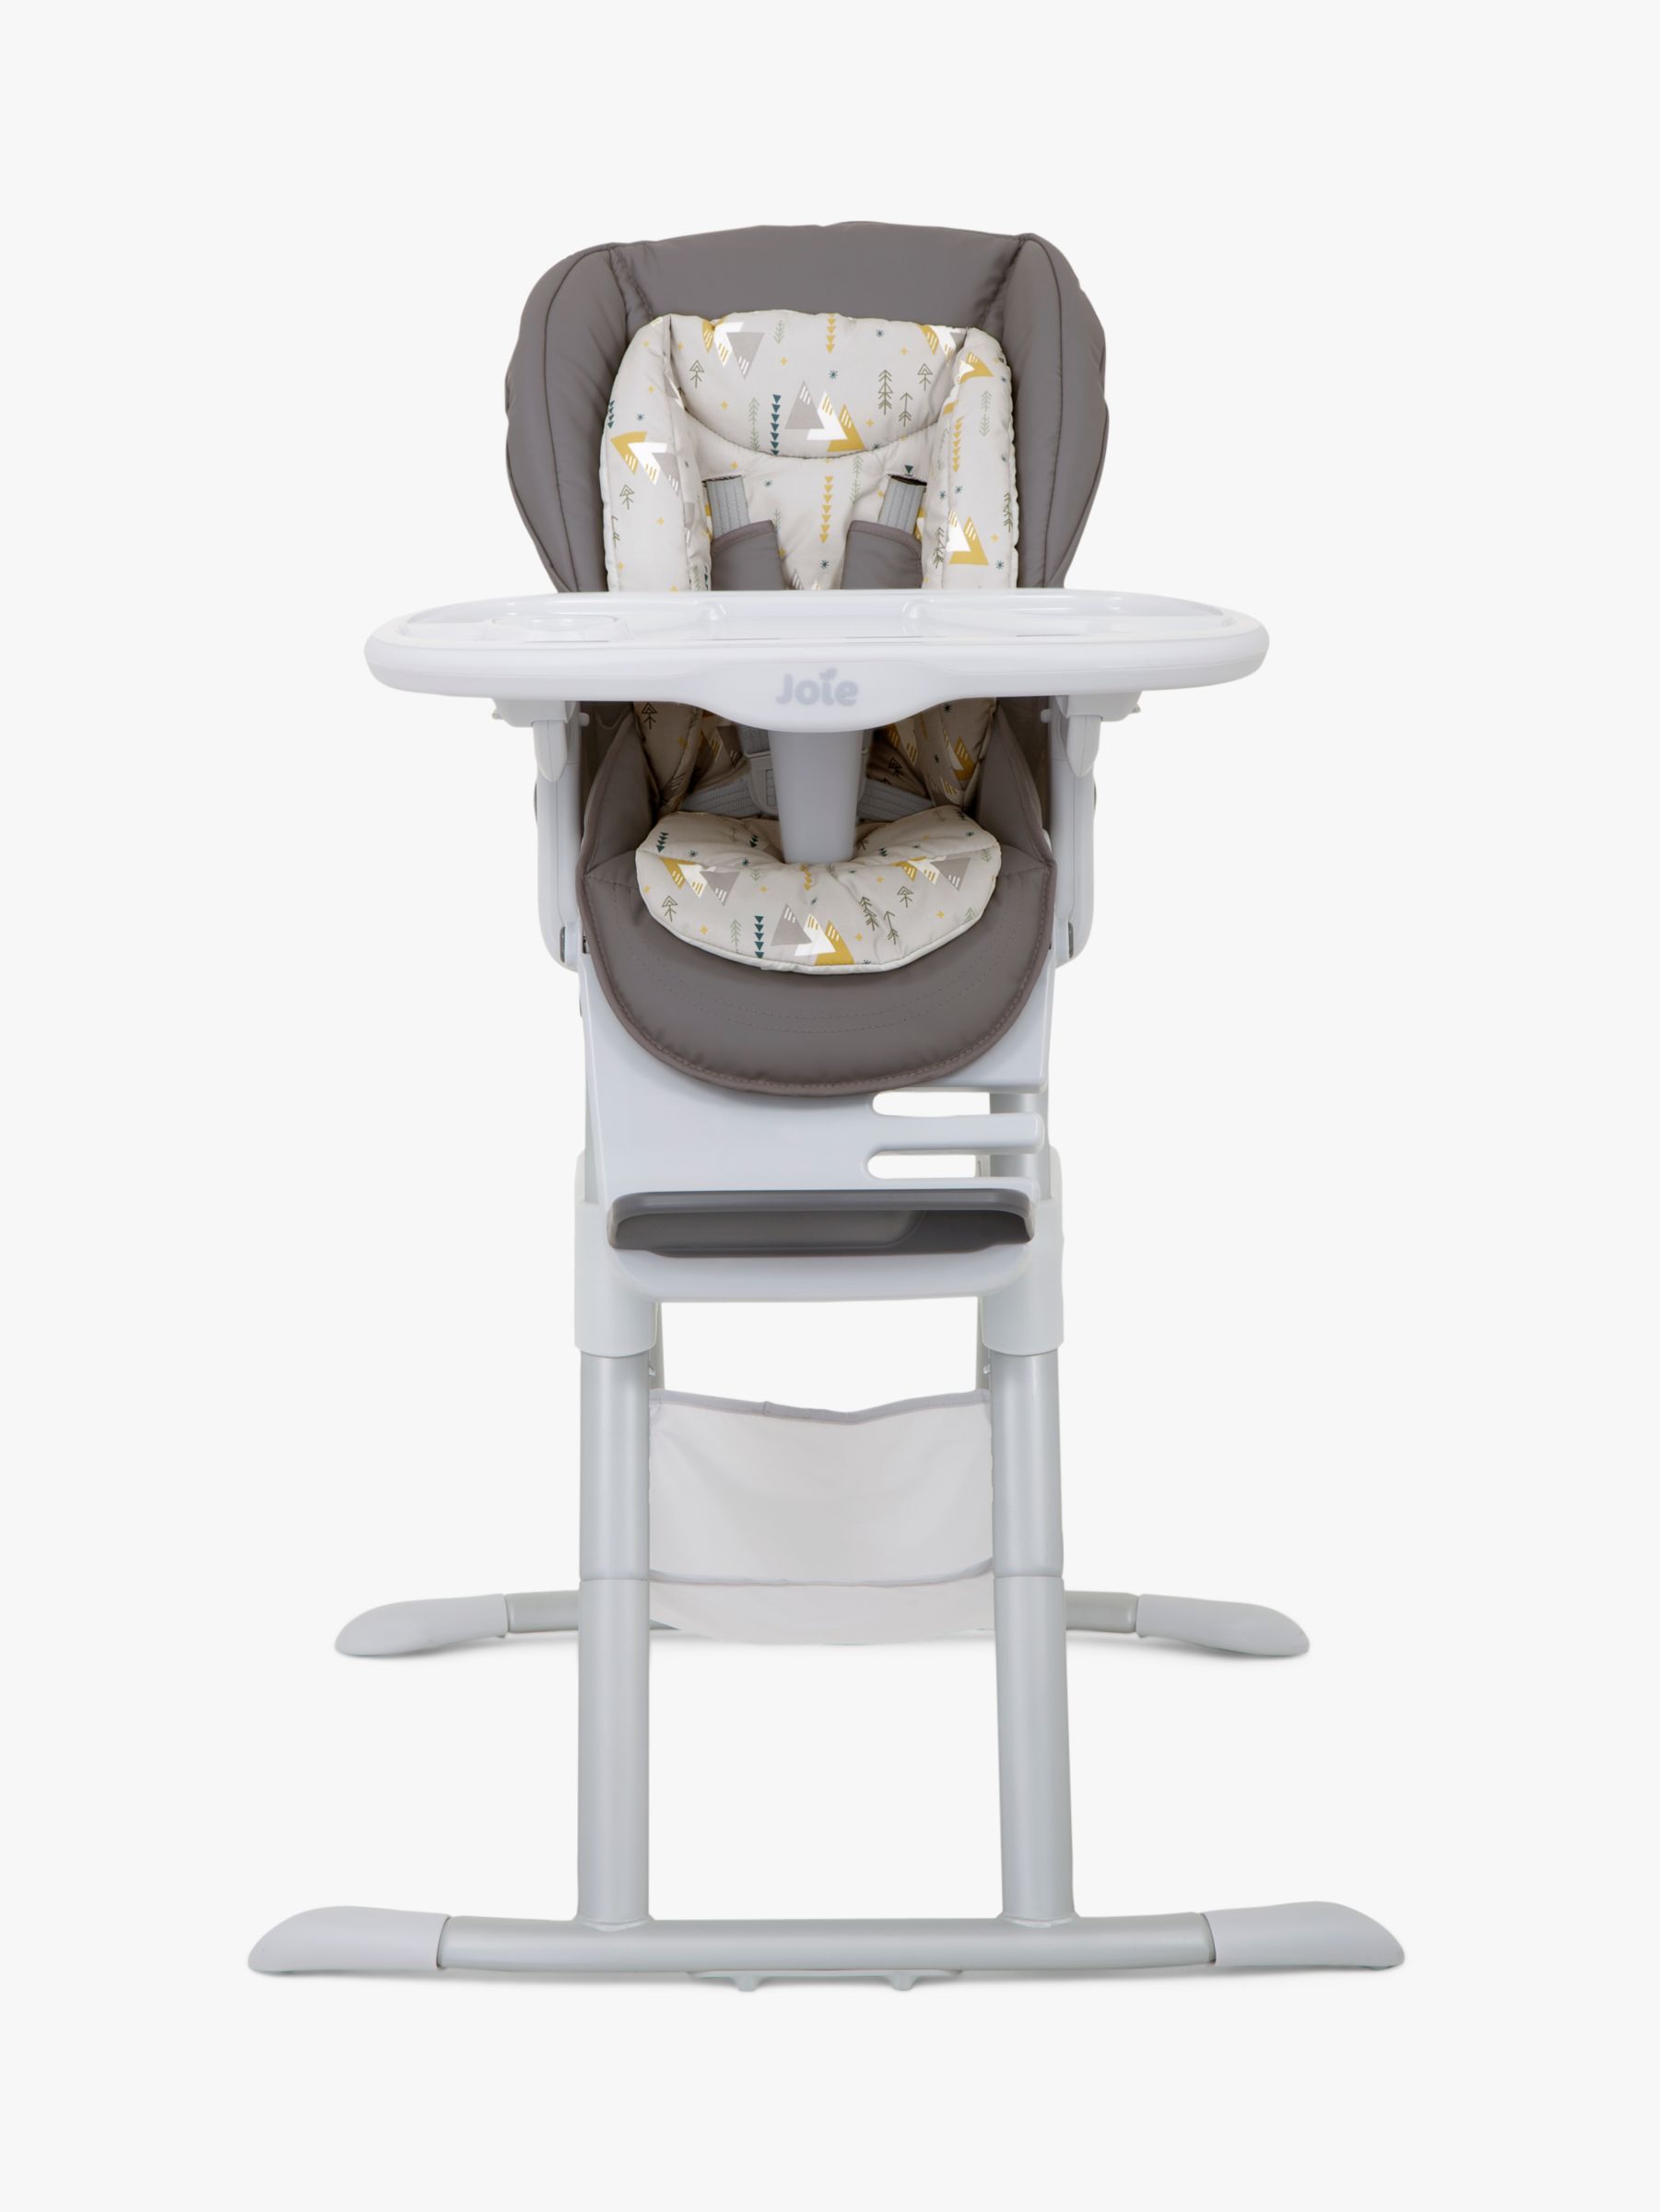 Image of Joie Baby Mimzy 3 in 1 Spin Highchair Geometric Mountains